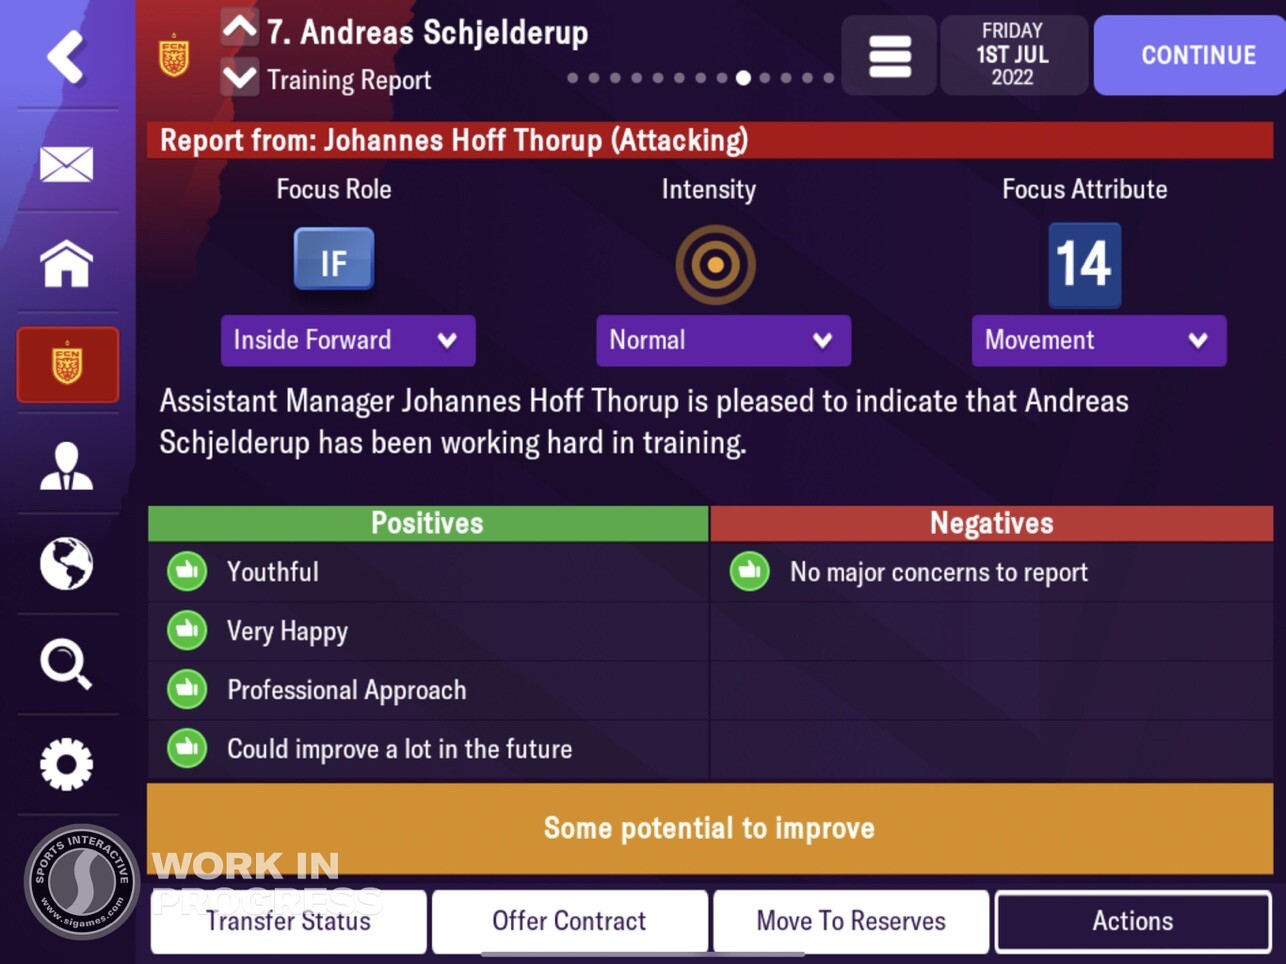 Football Manager 2023 Mobile - New Features - Official Site